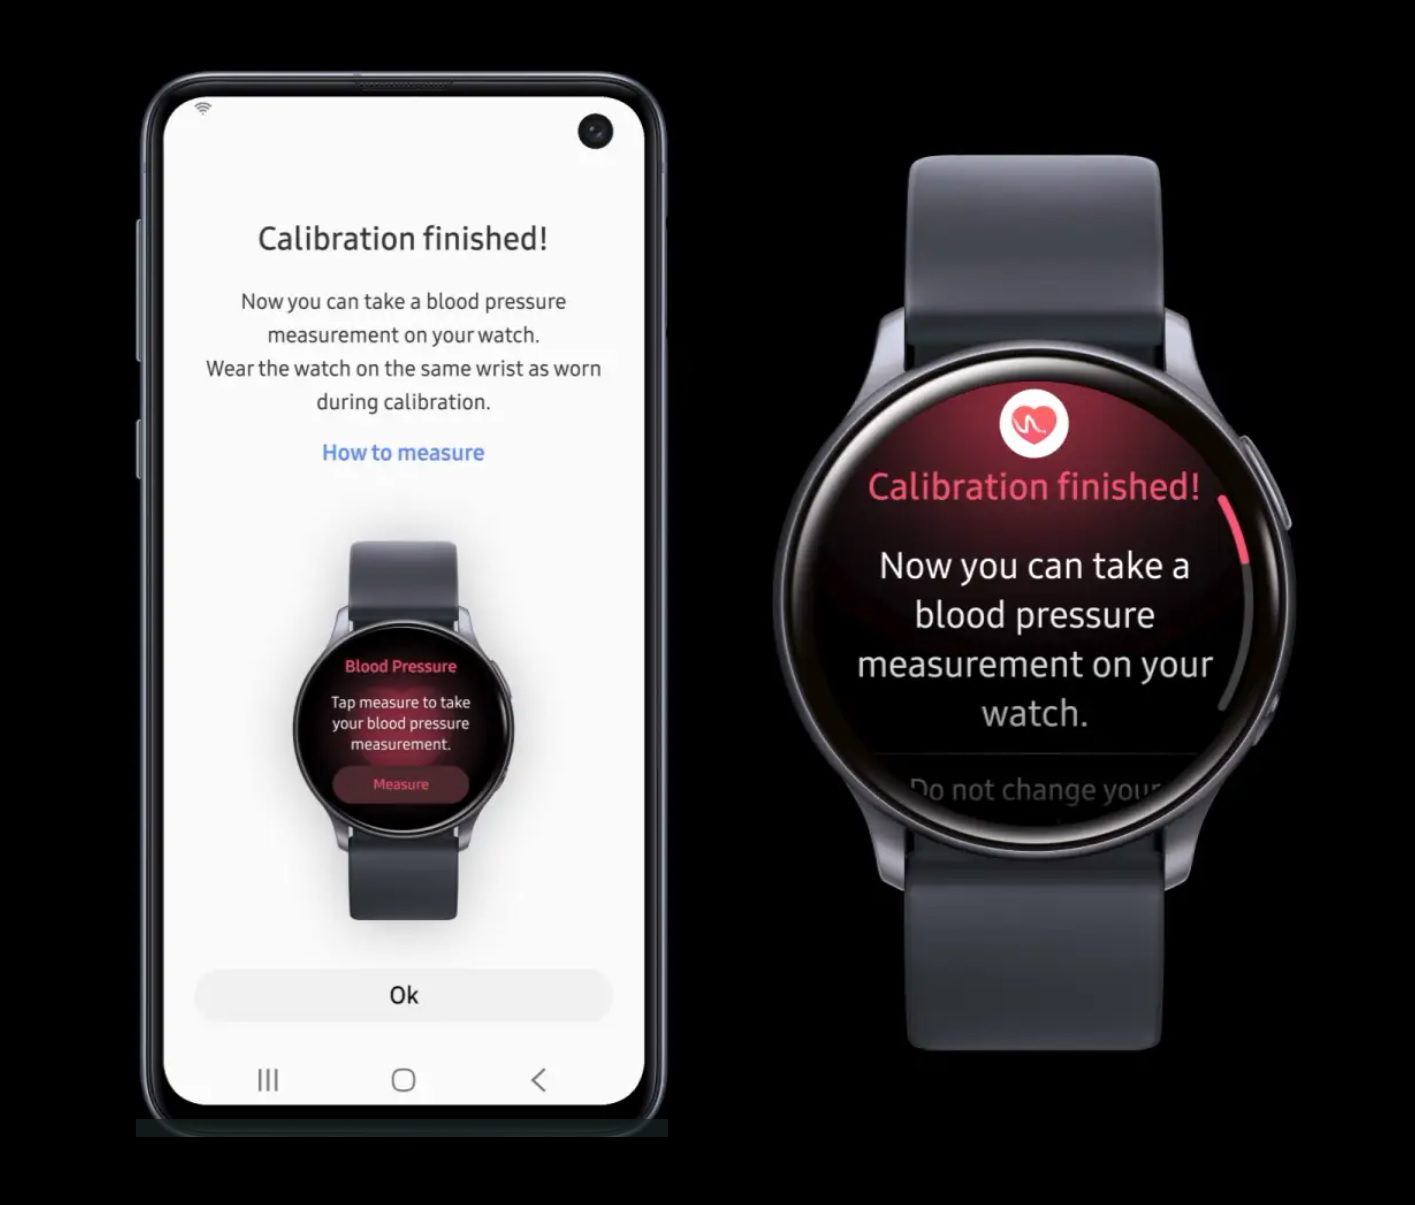 Here’s how to install the BP monitor app on your Samsung Galaxy Watch Active2